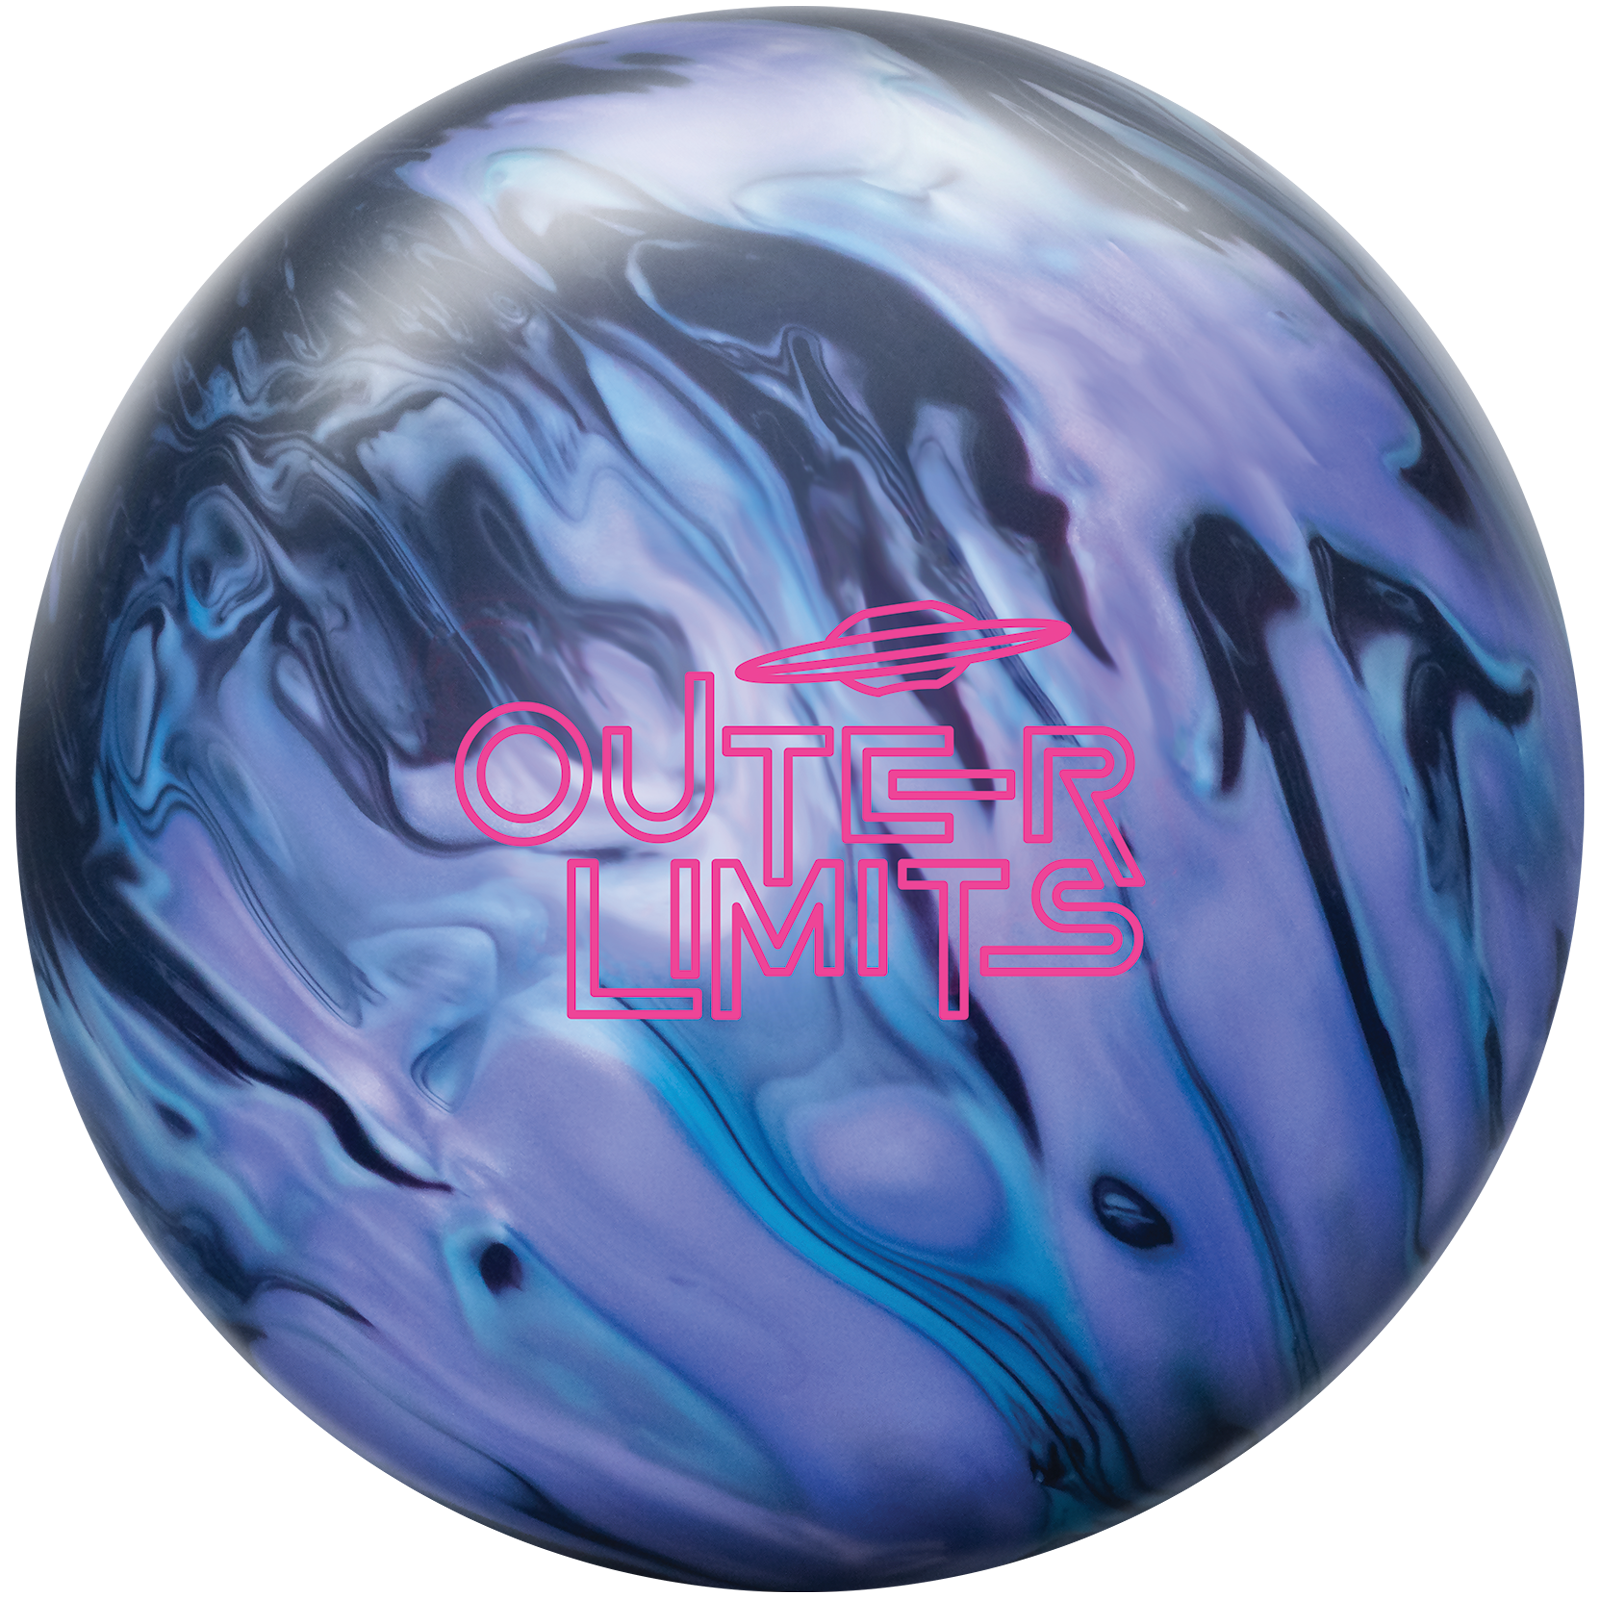 Outer Limits  Radical Bowling